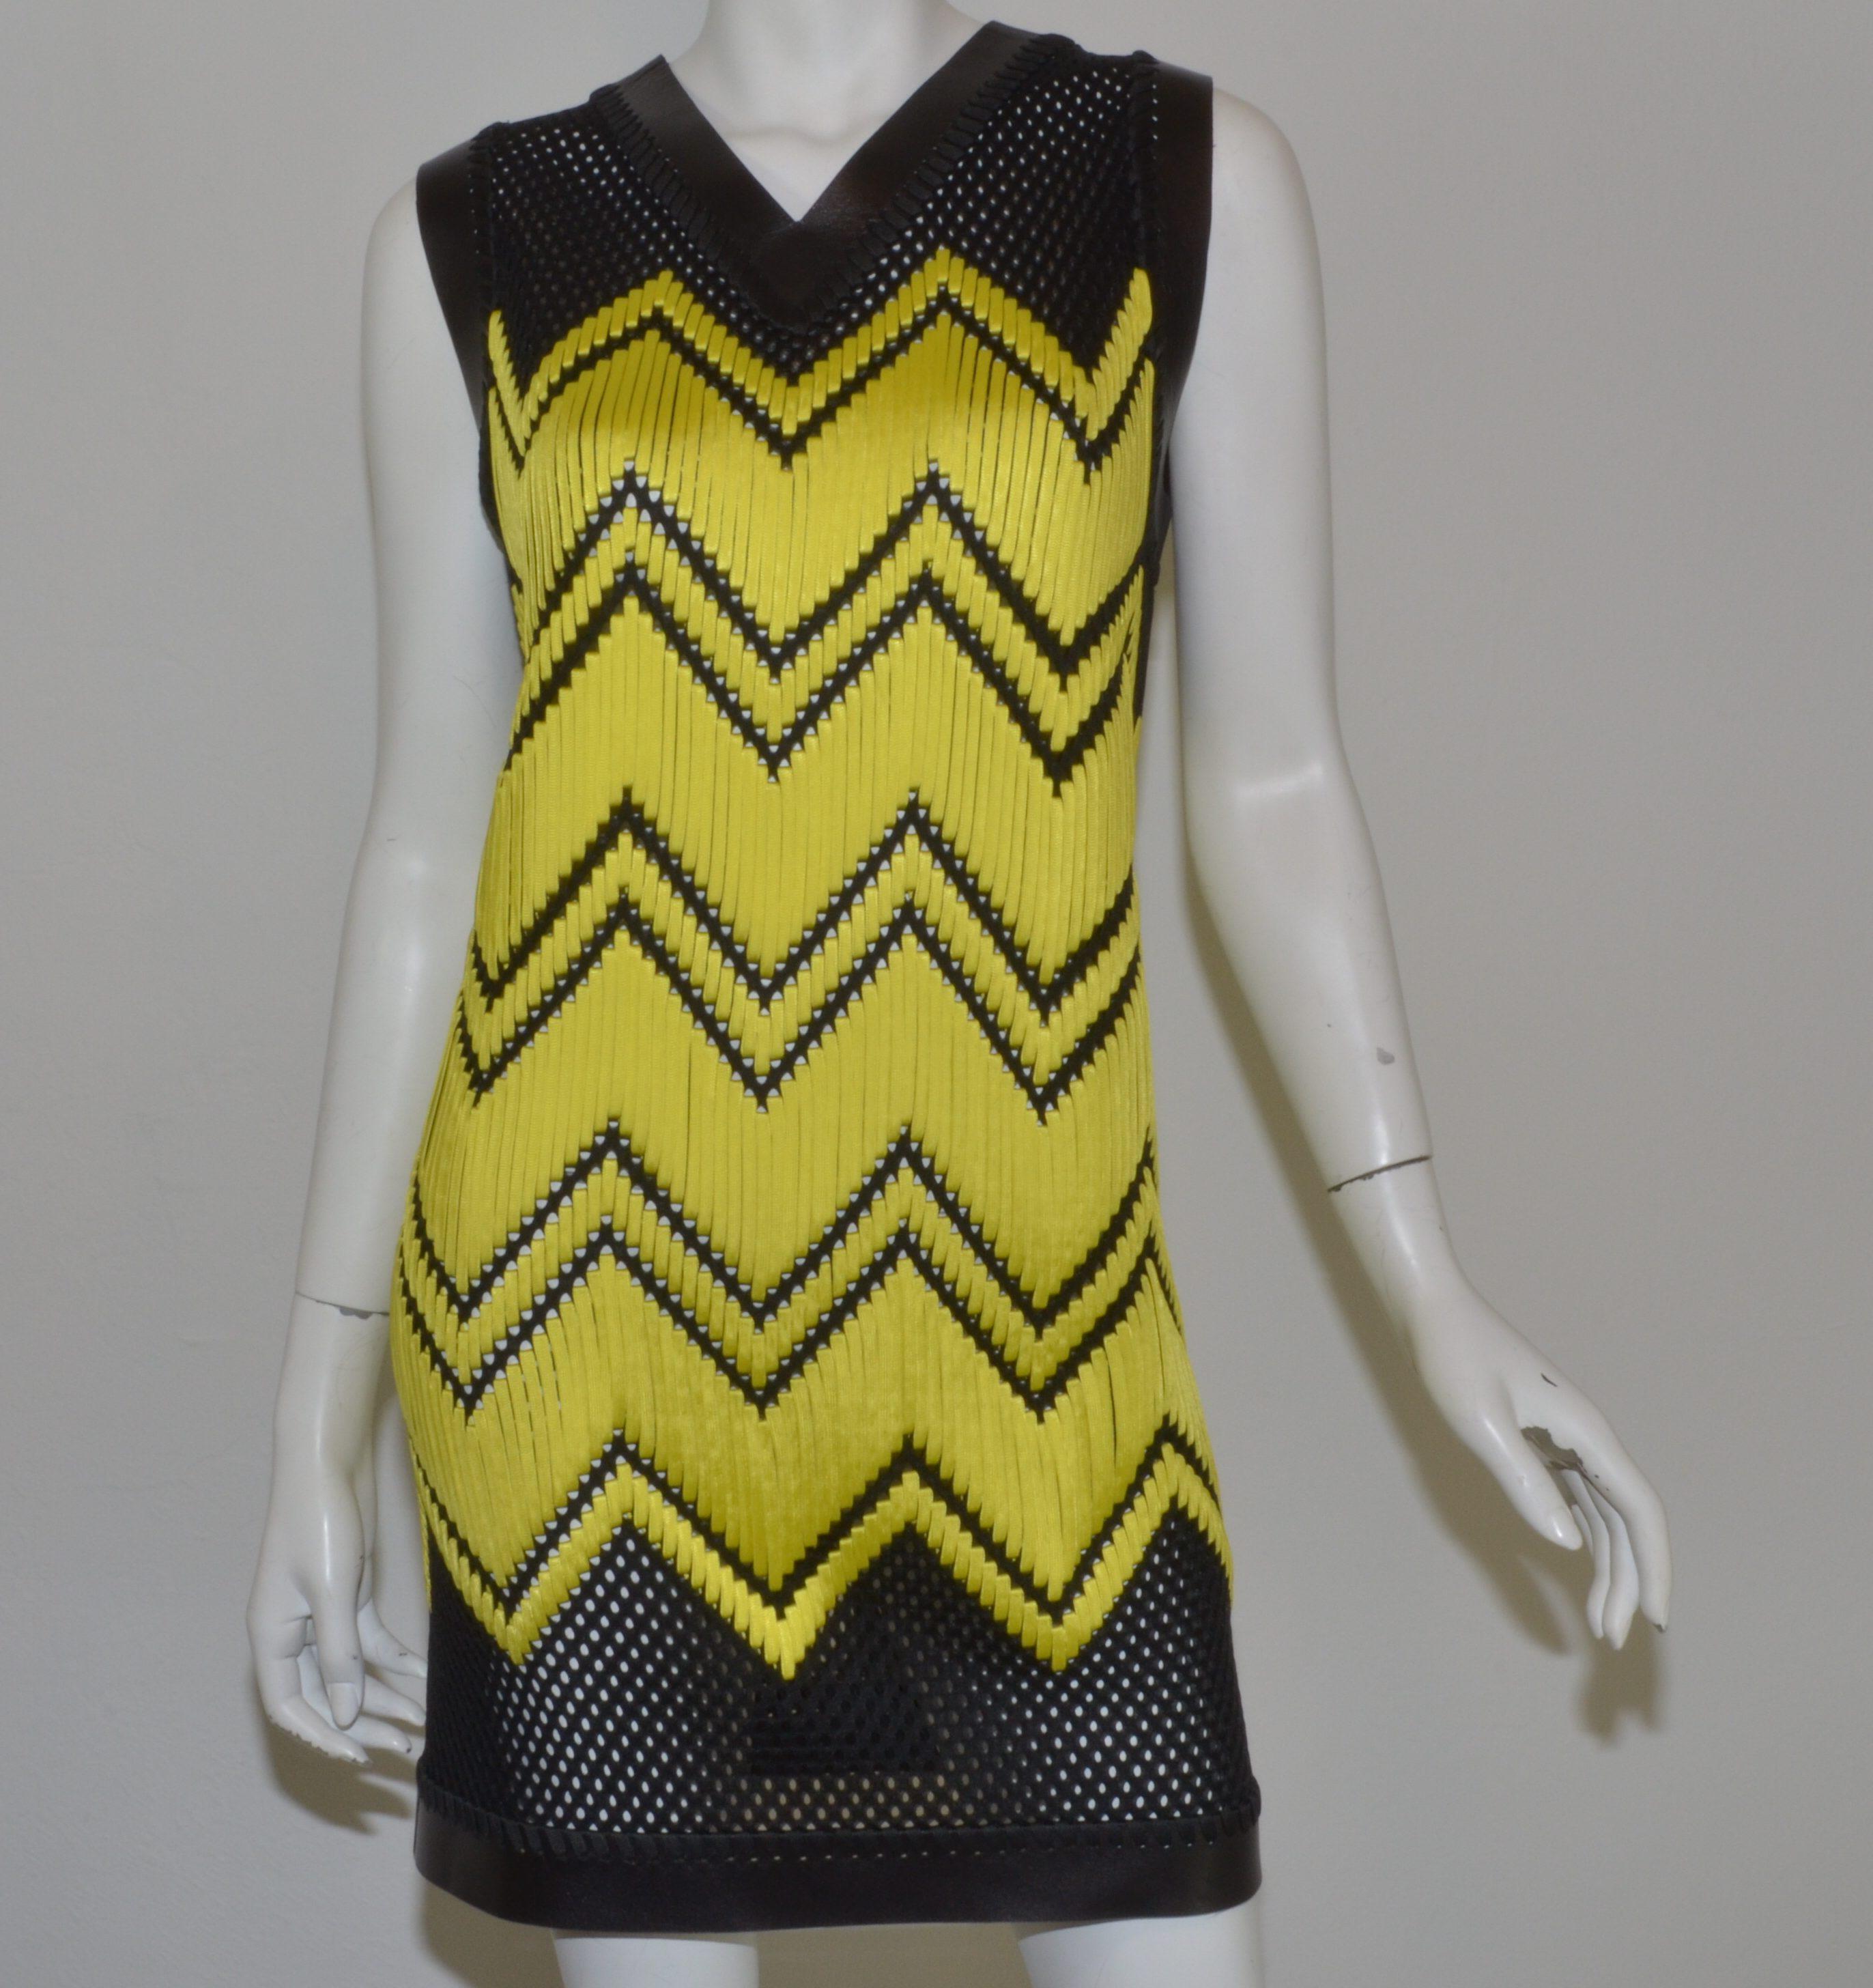 Alexander Wang dress is featured in a black and highlighter-yellow jersey mesh fabric with a chevron design. Dress has a leather-trimmed V-neckline and hem and is labeled a size OS (one size). Dress is composed with 100% polyester and lambskin